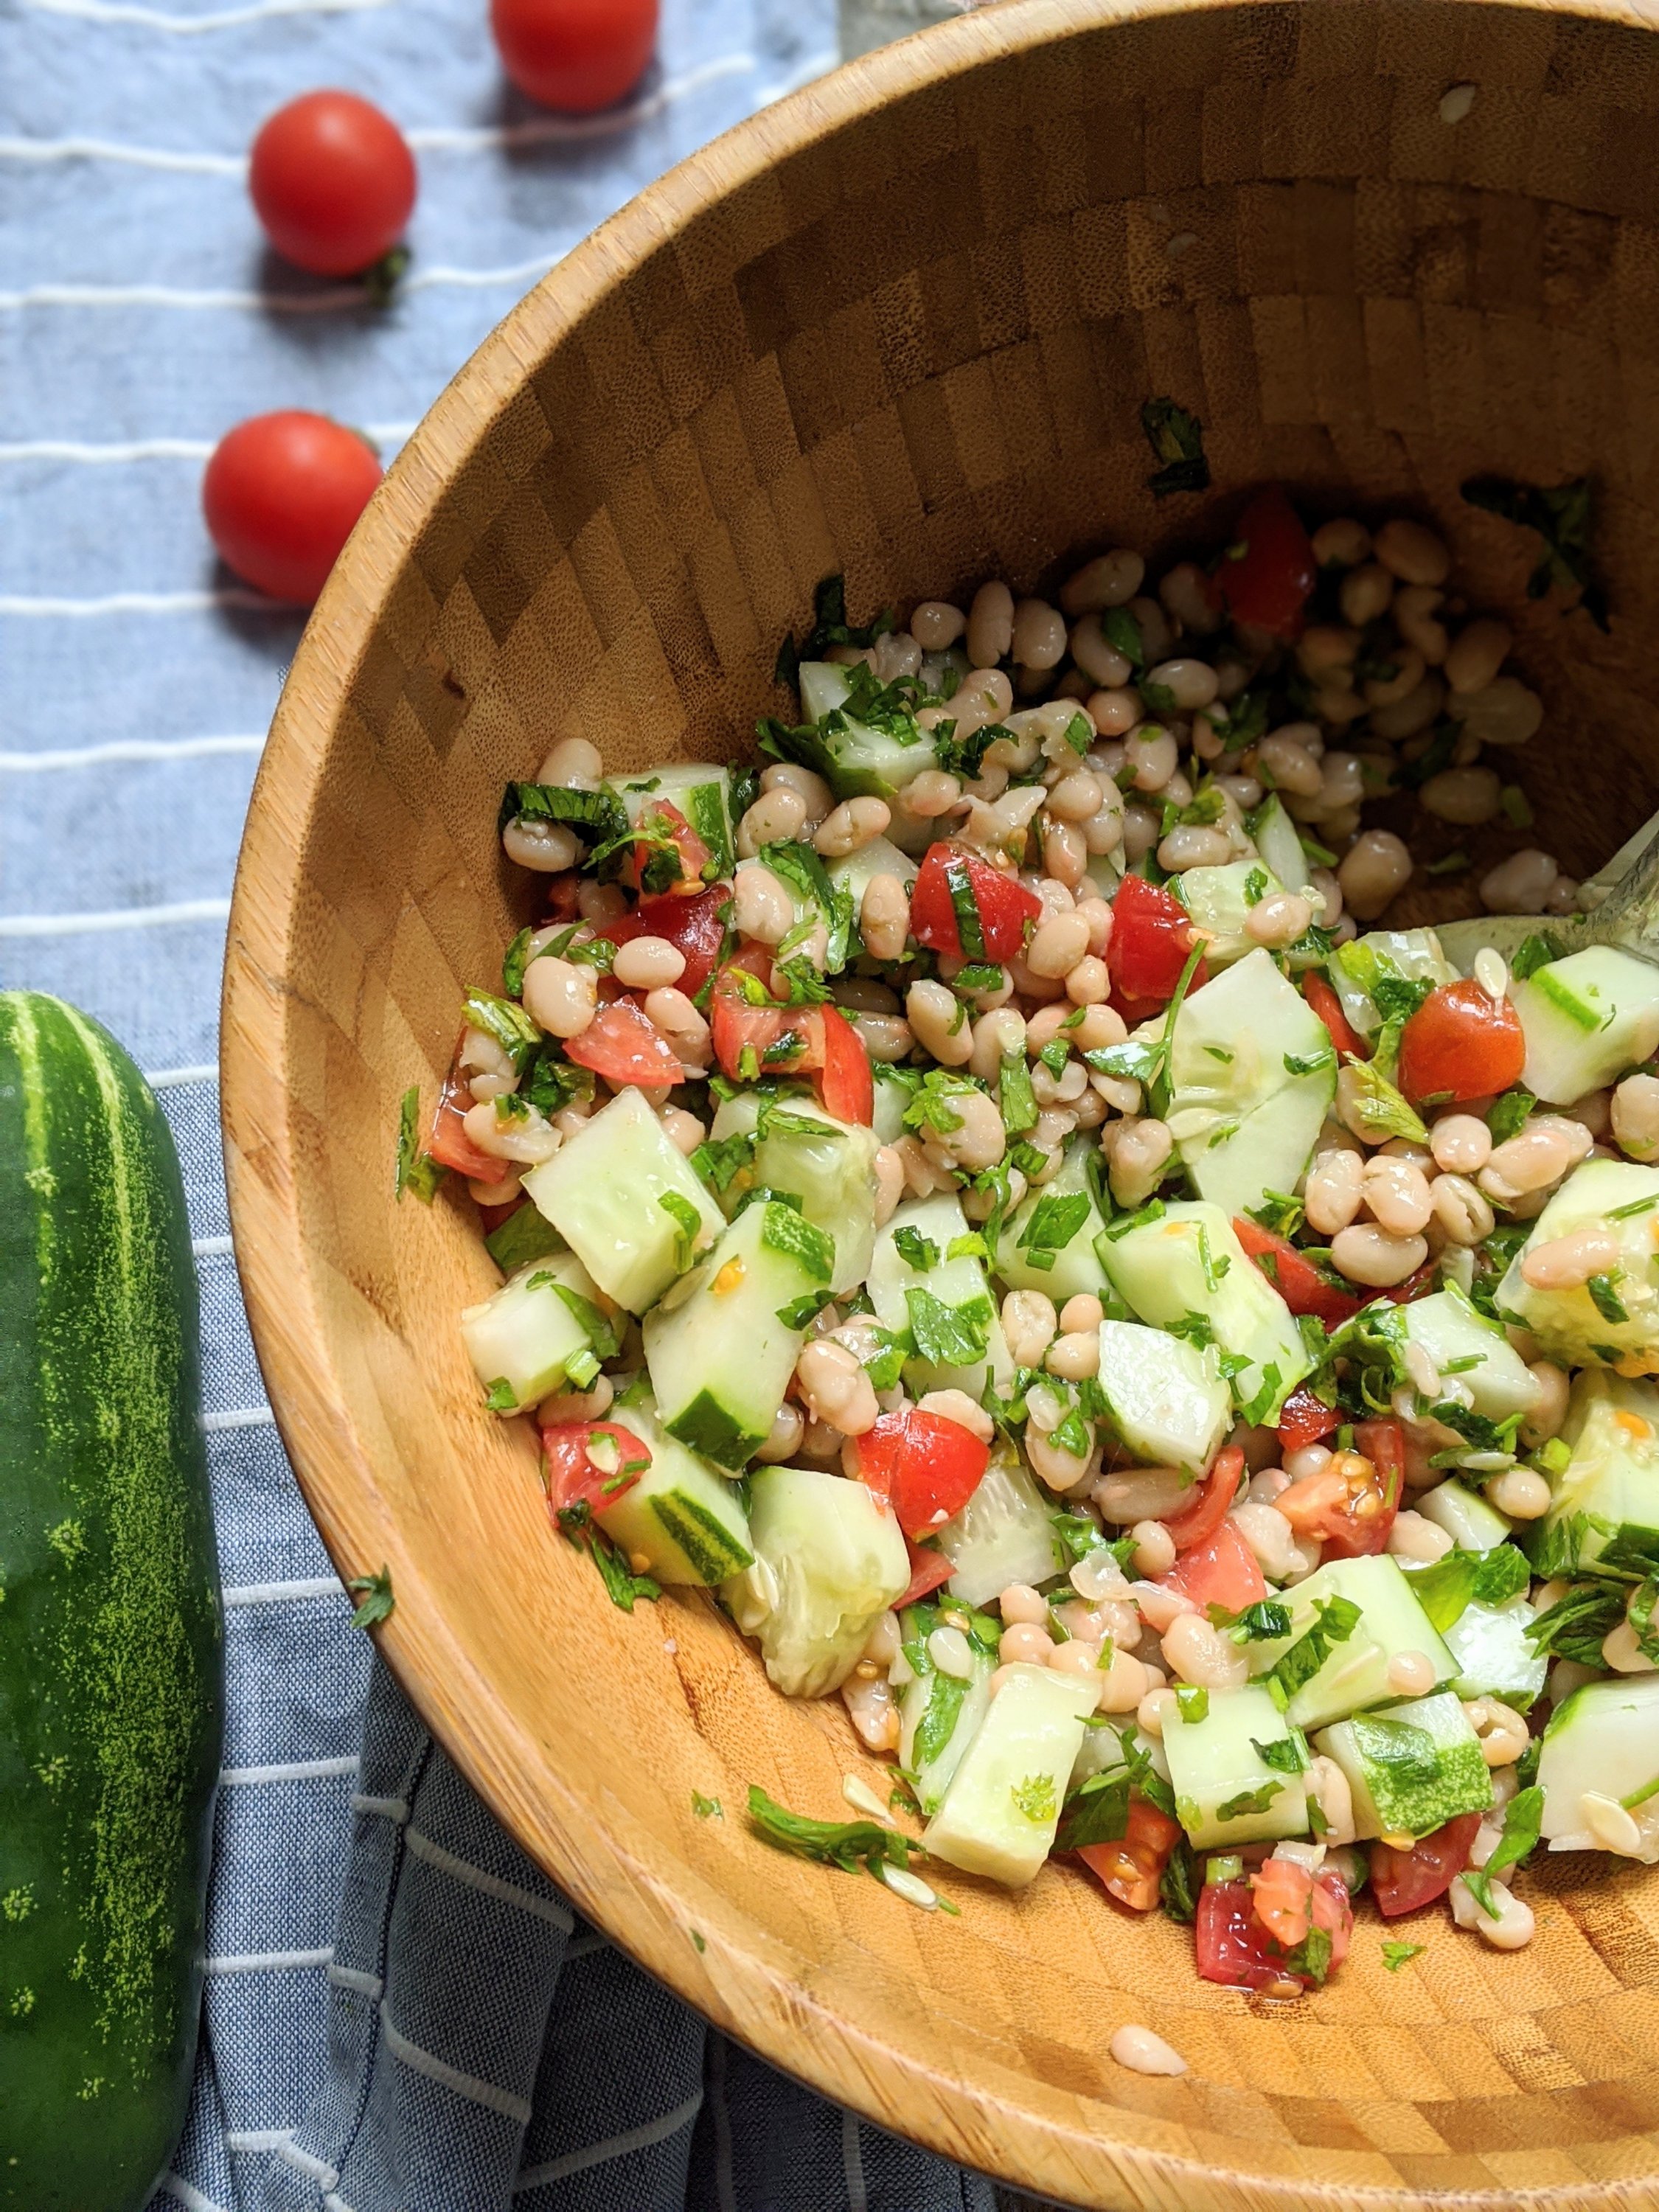 no cook summer salad recipes with beans vegan vegetarian gluten free plant based healthy potluck recipes everyone will love with summer produce salad seasonal eats